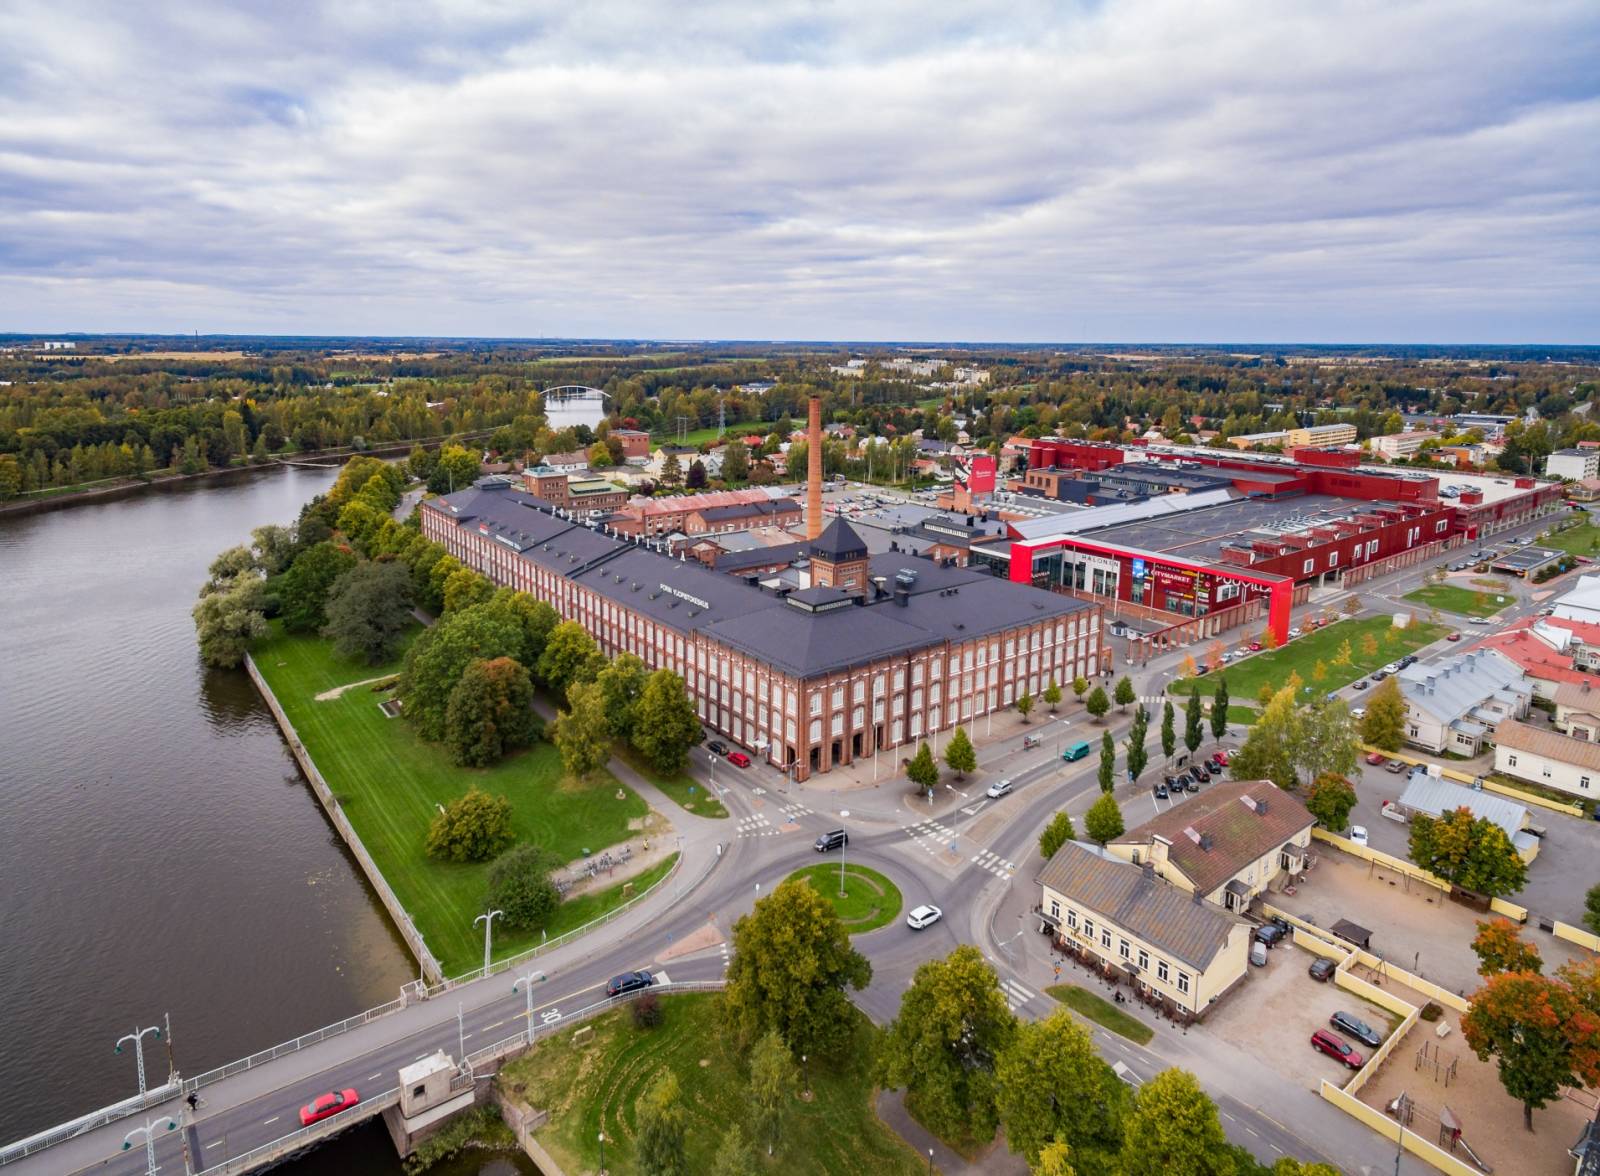 University Consortium of Pori. An aerial view of the red brick block of the old cotton factory on the shore of the Kokemäenjoki river, where the University Consortium of Pori is located.